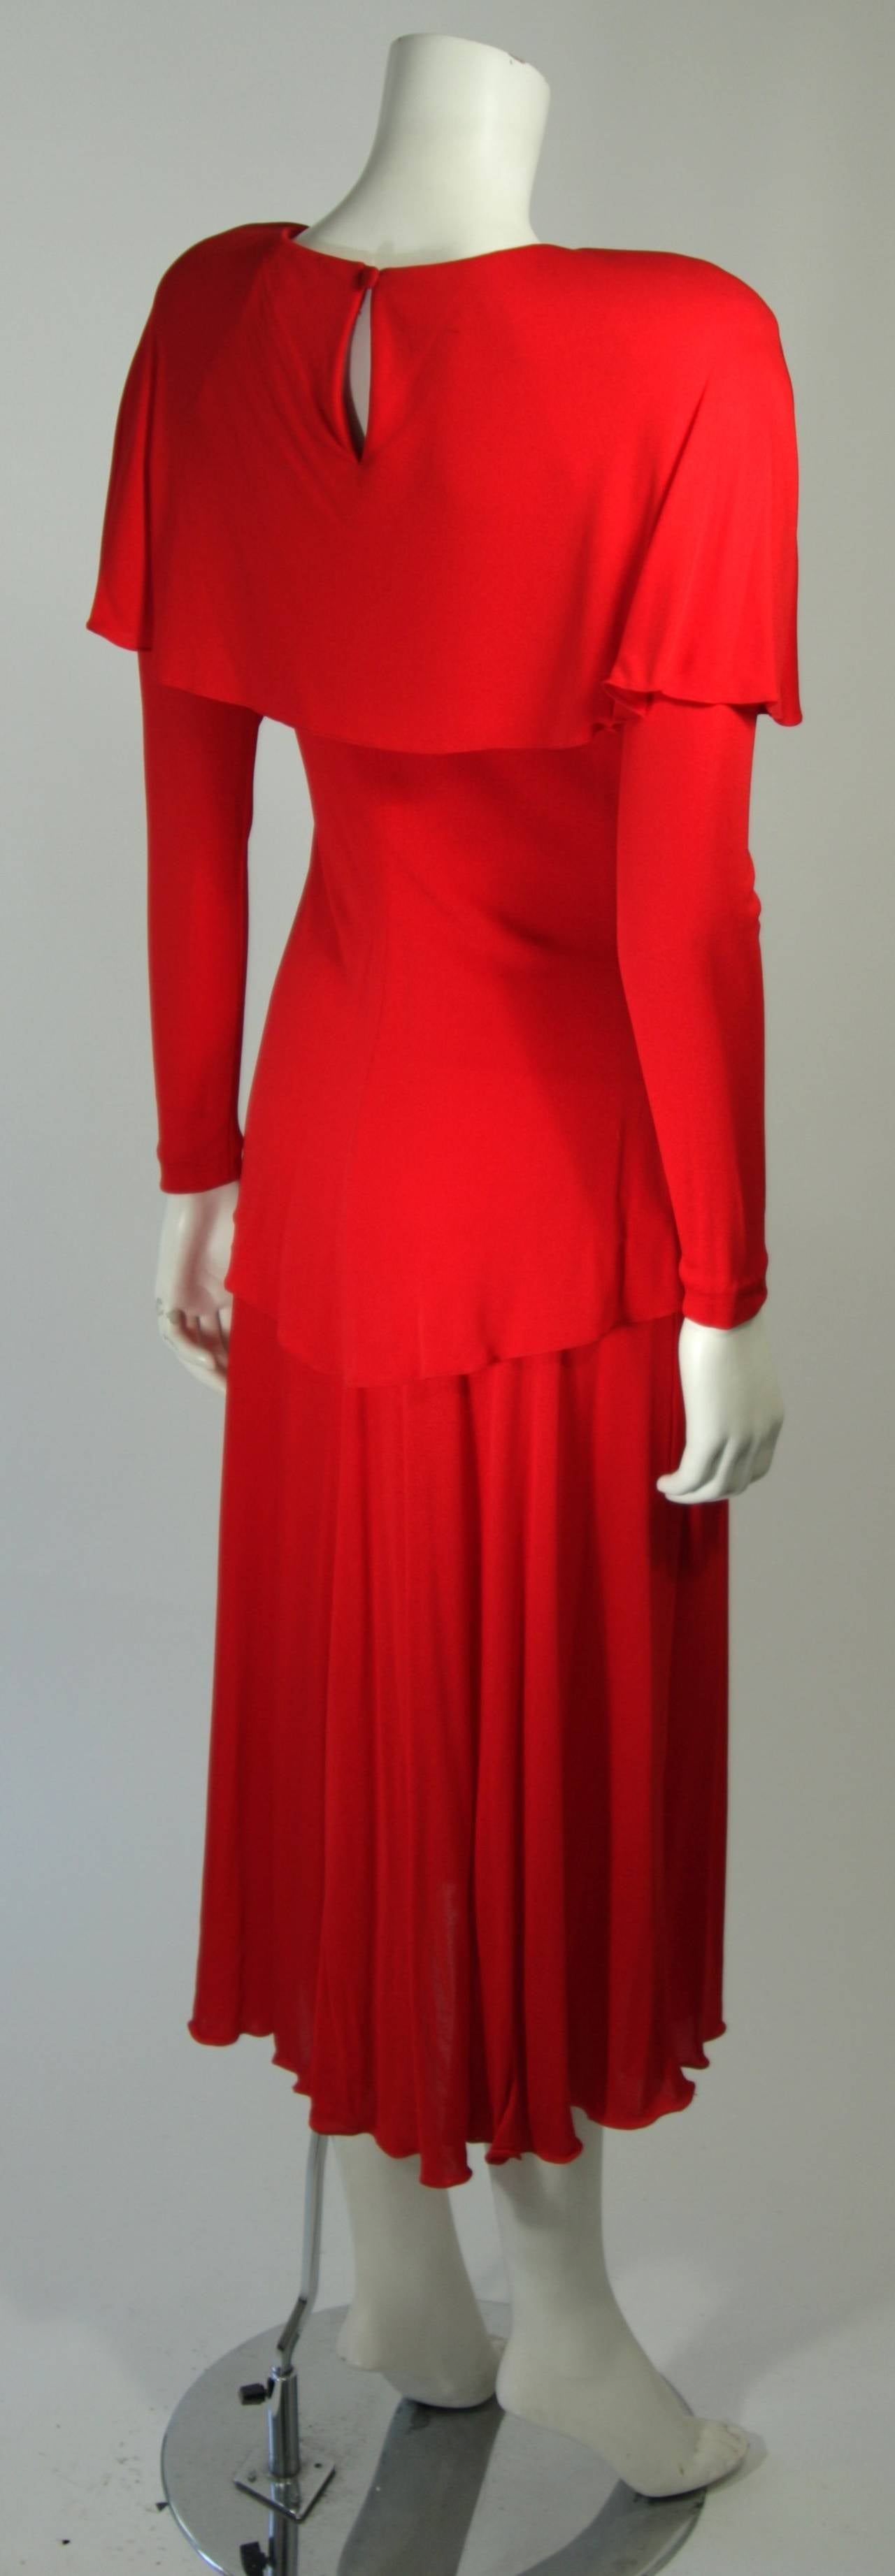 Holly Harp Red Jersey Long Sleeve Dress with Rhinestone Buttons Size Medium For Sale 1